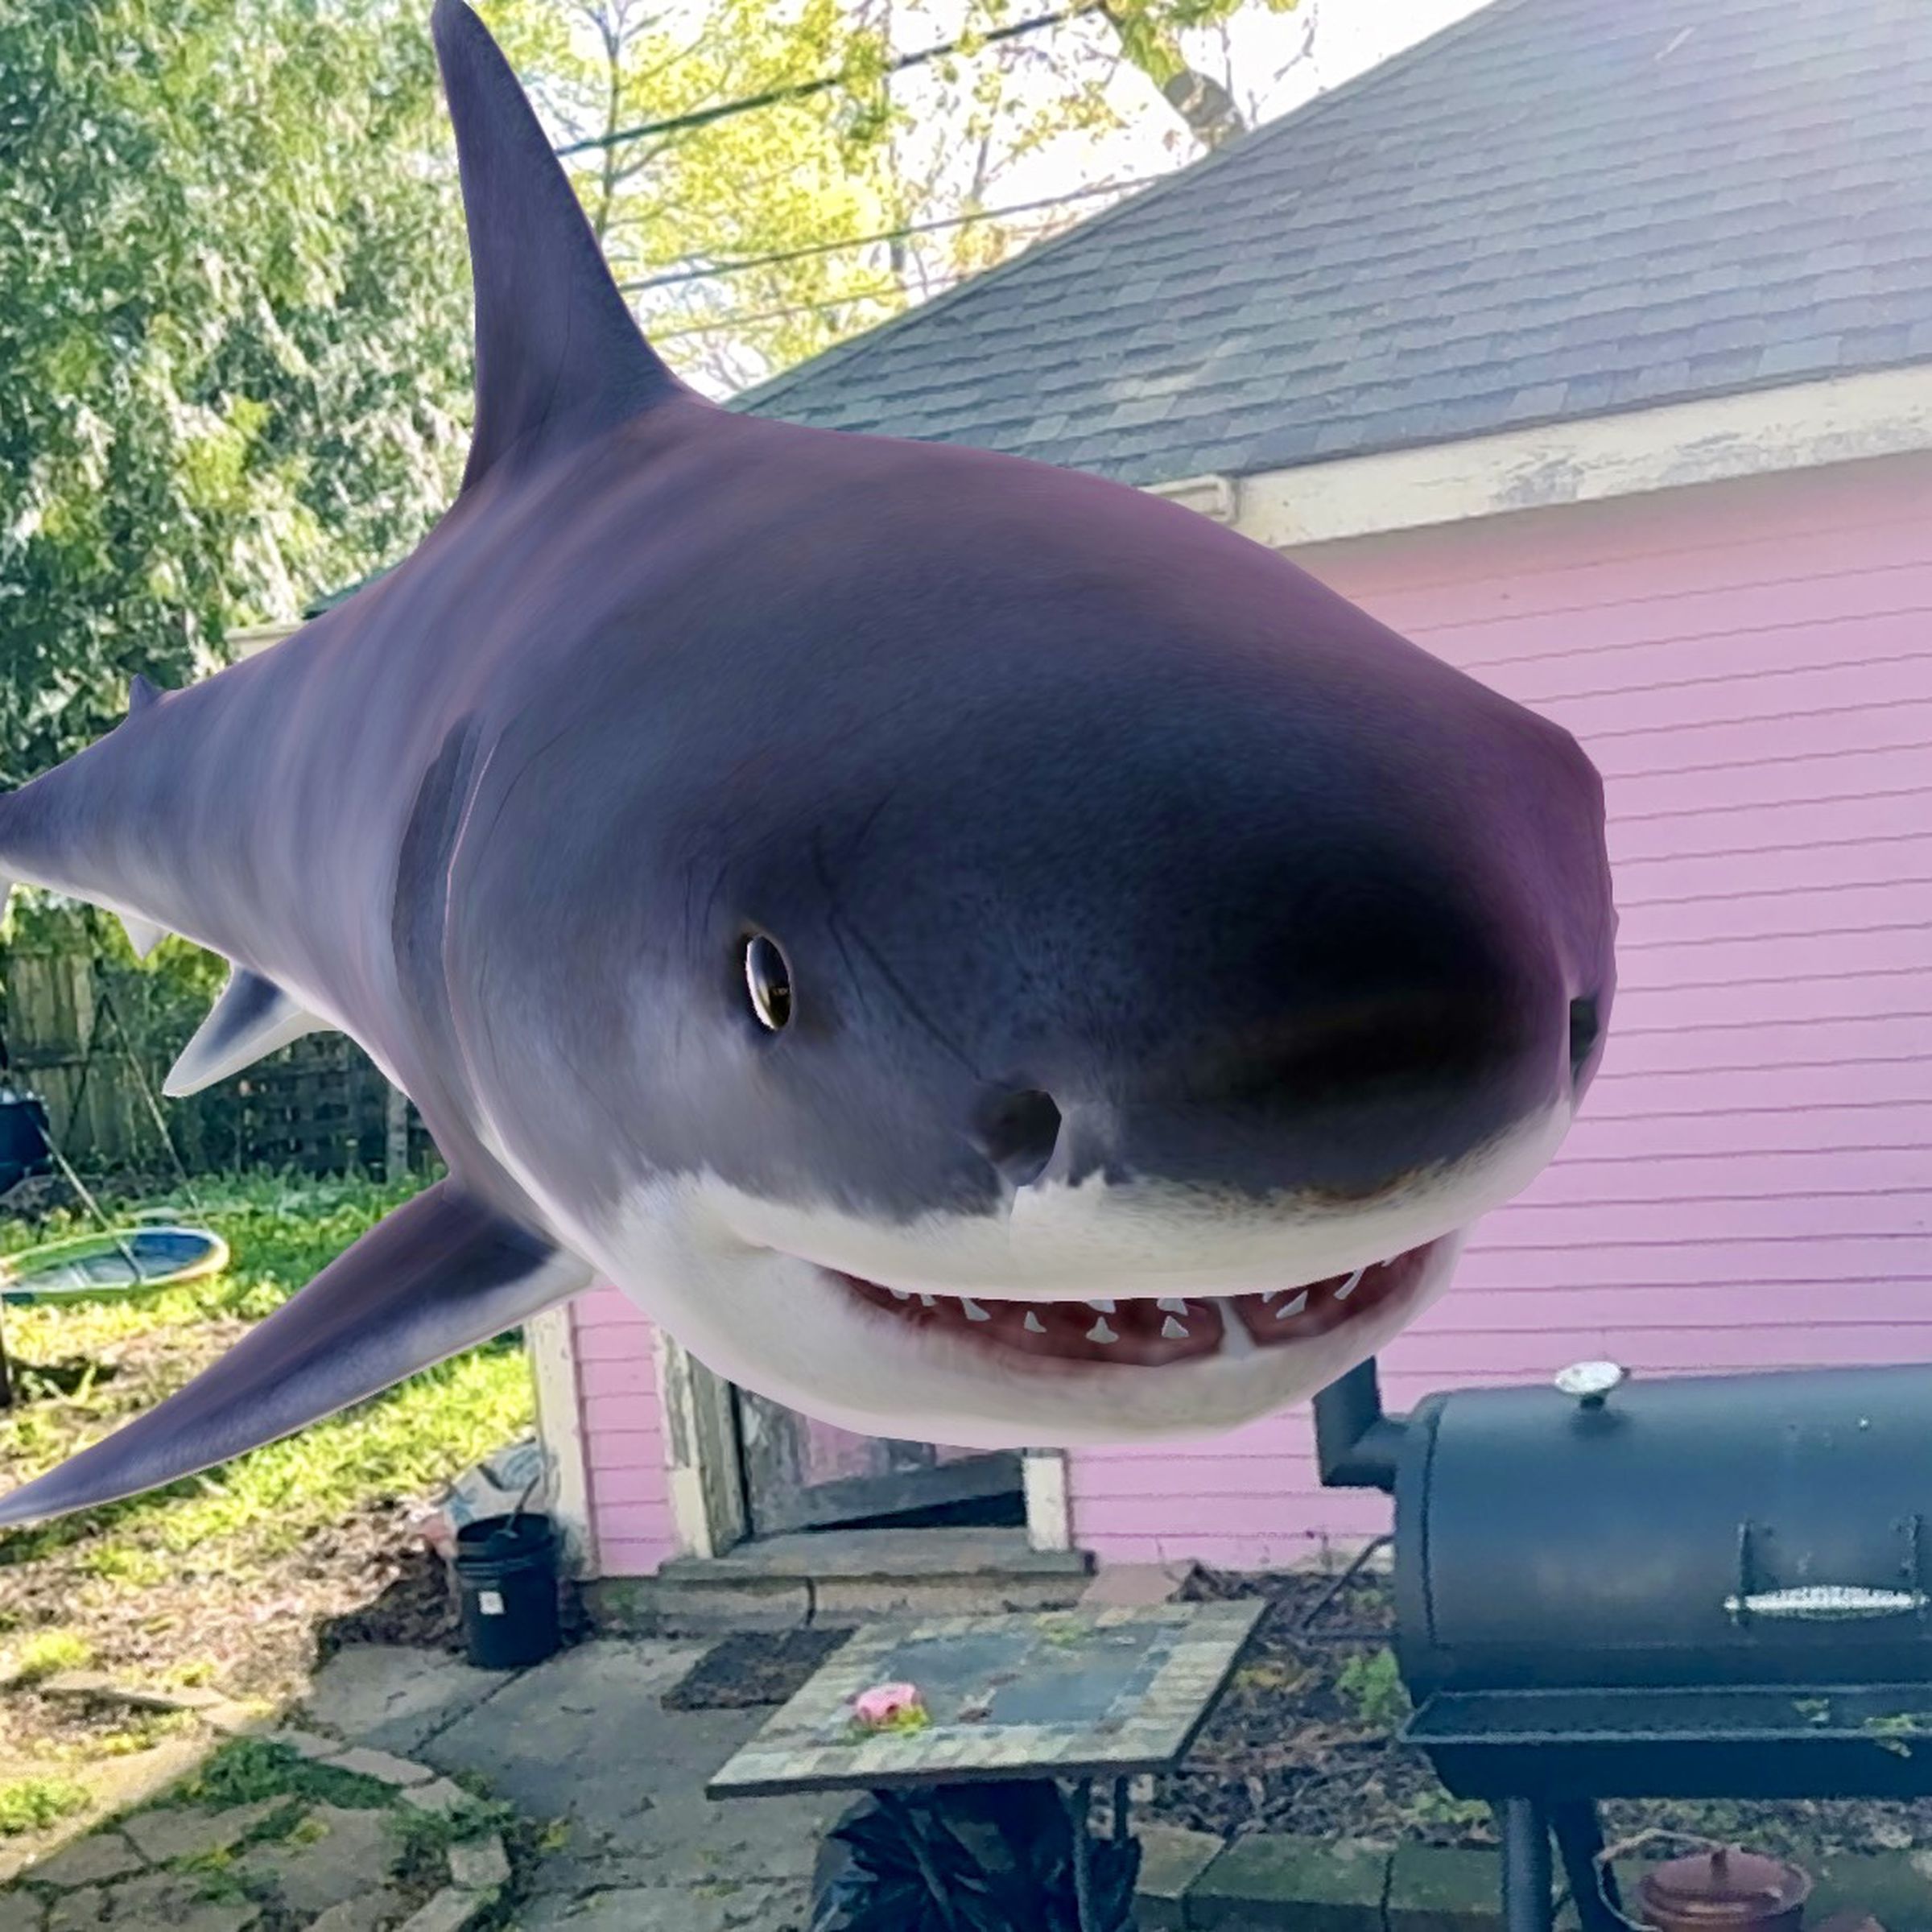 A Great White Shark floating above the ground in a backyard area.